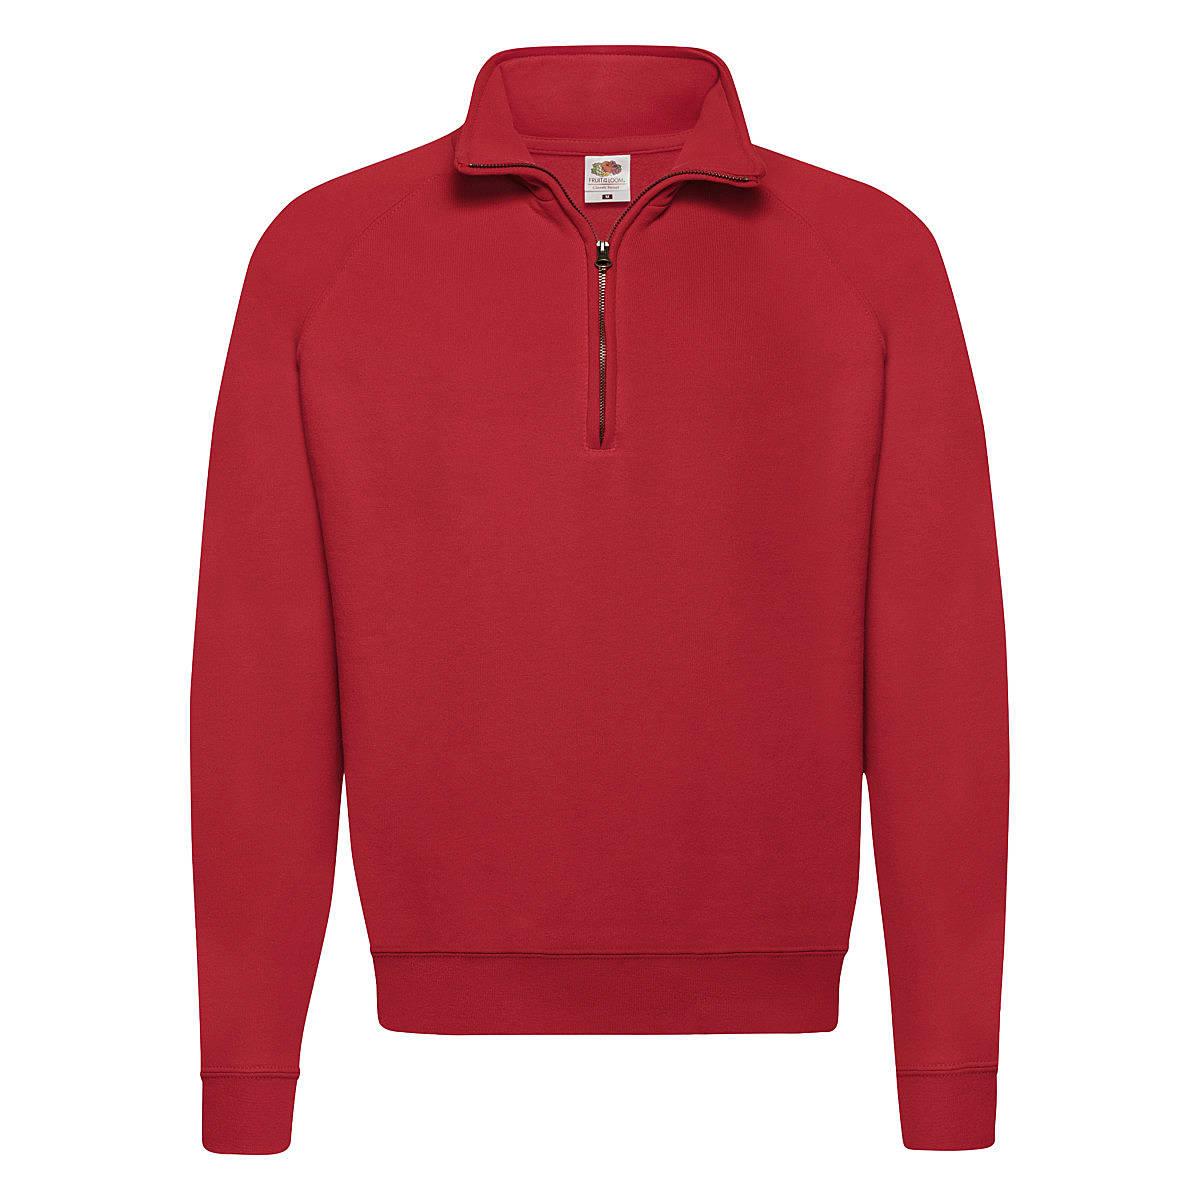 Fruit Of The Loom Mens Classic Zip Neck Sweater in Red (Product Code: 62114)